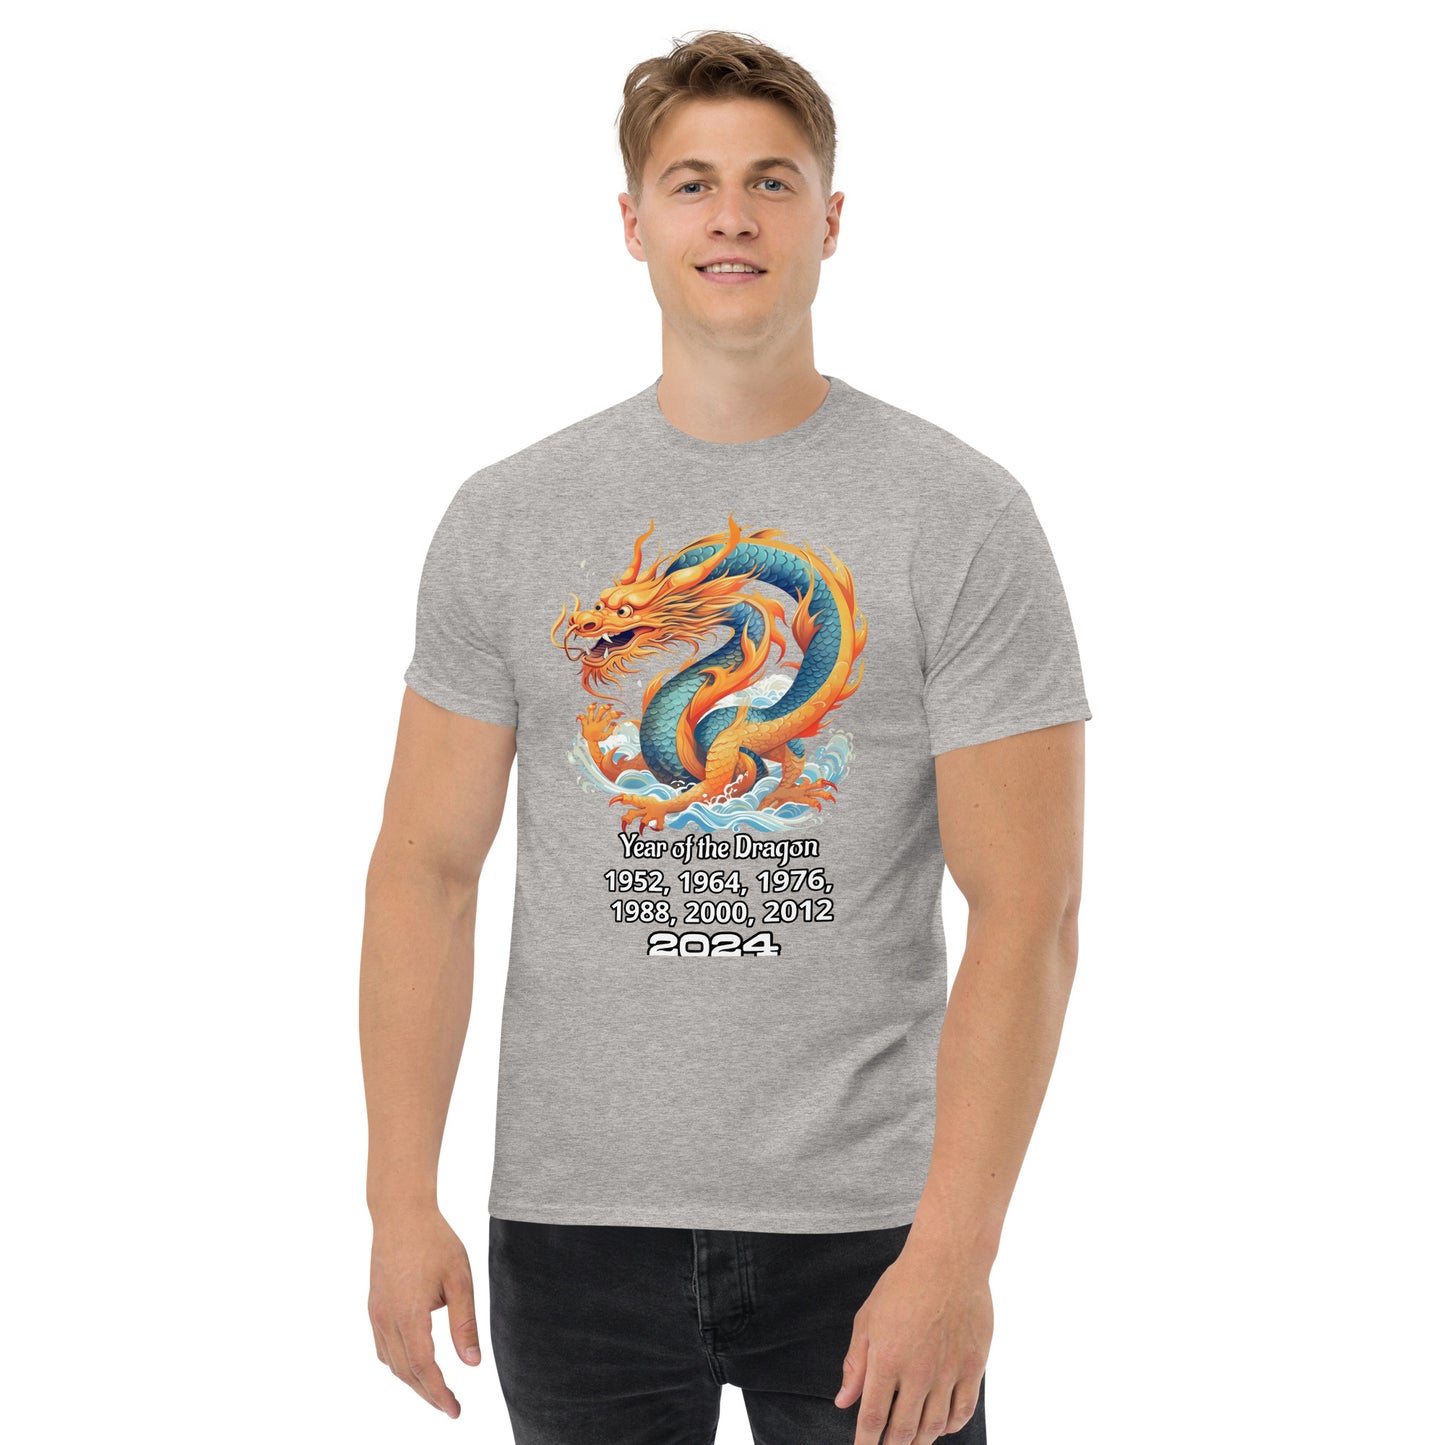 Year of the Dragon Men's classic tee